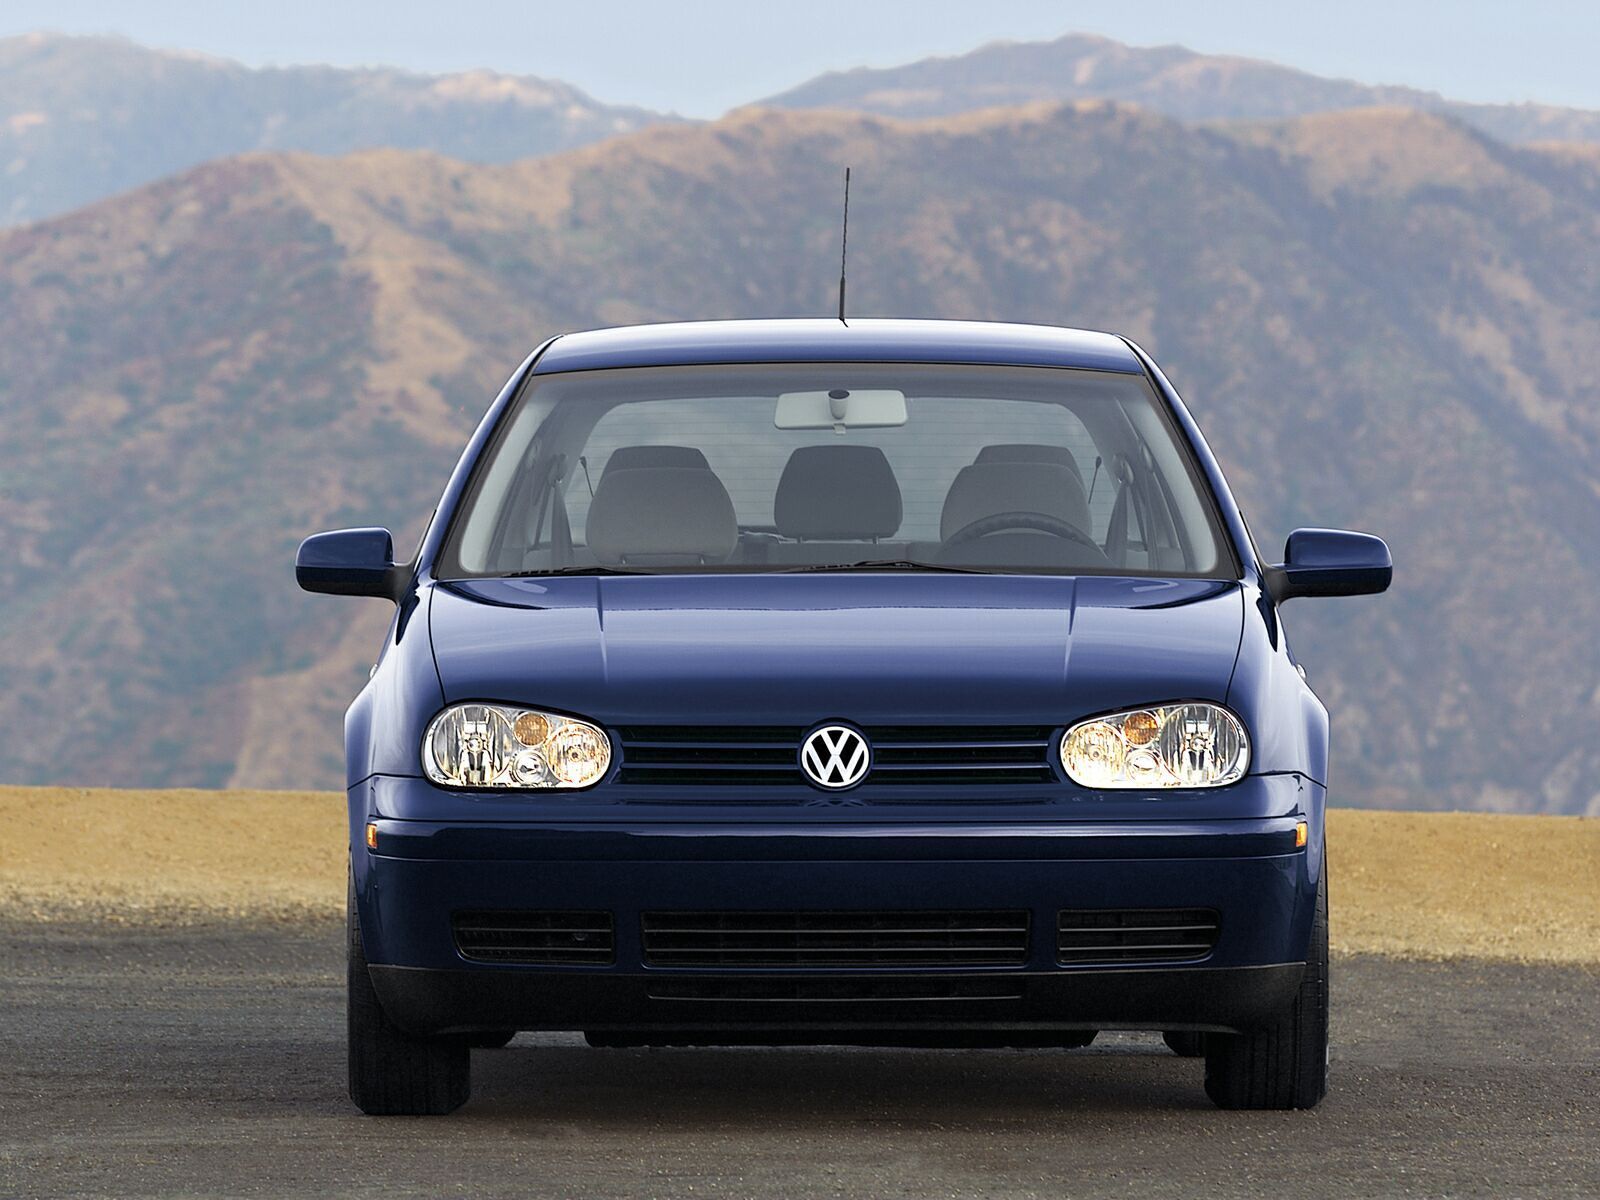 Volkswagen Golf MK4 - Everything You Need to Know About One of the